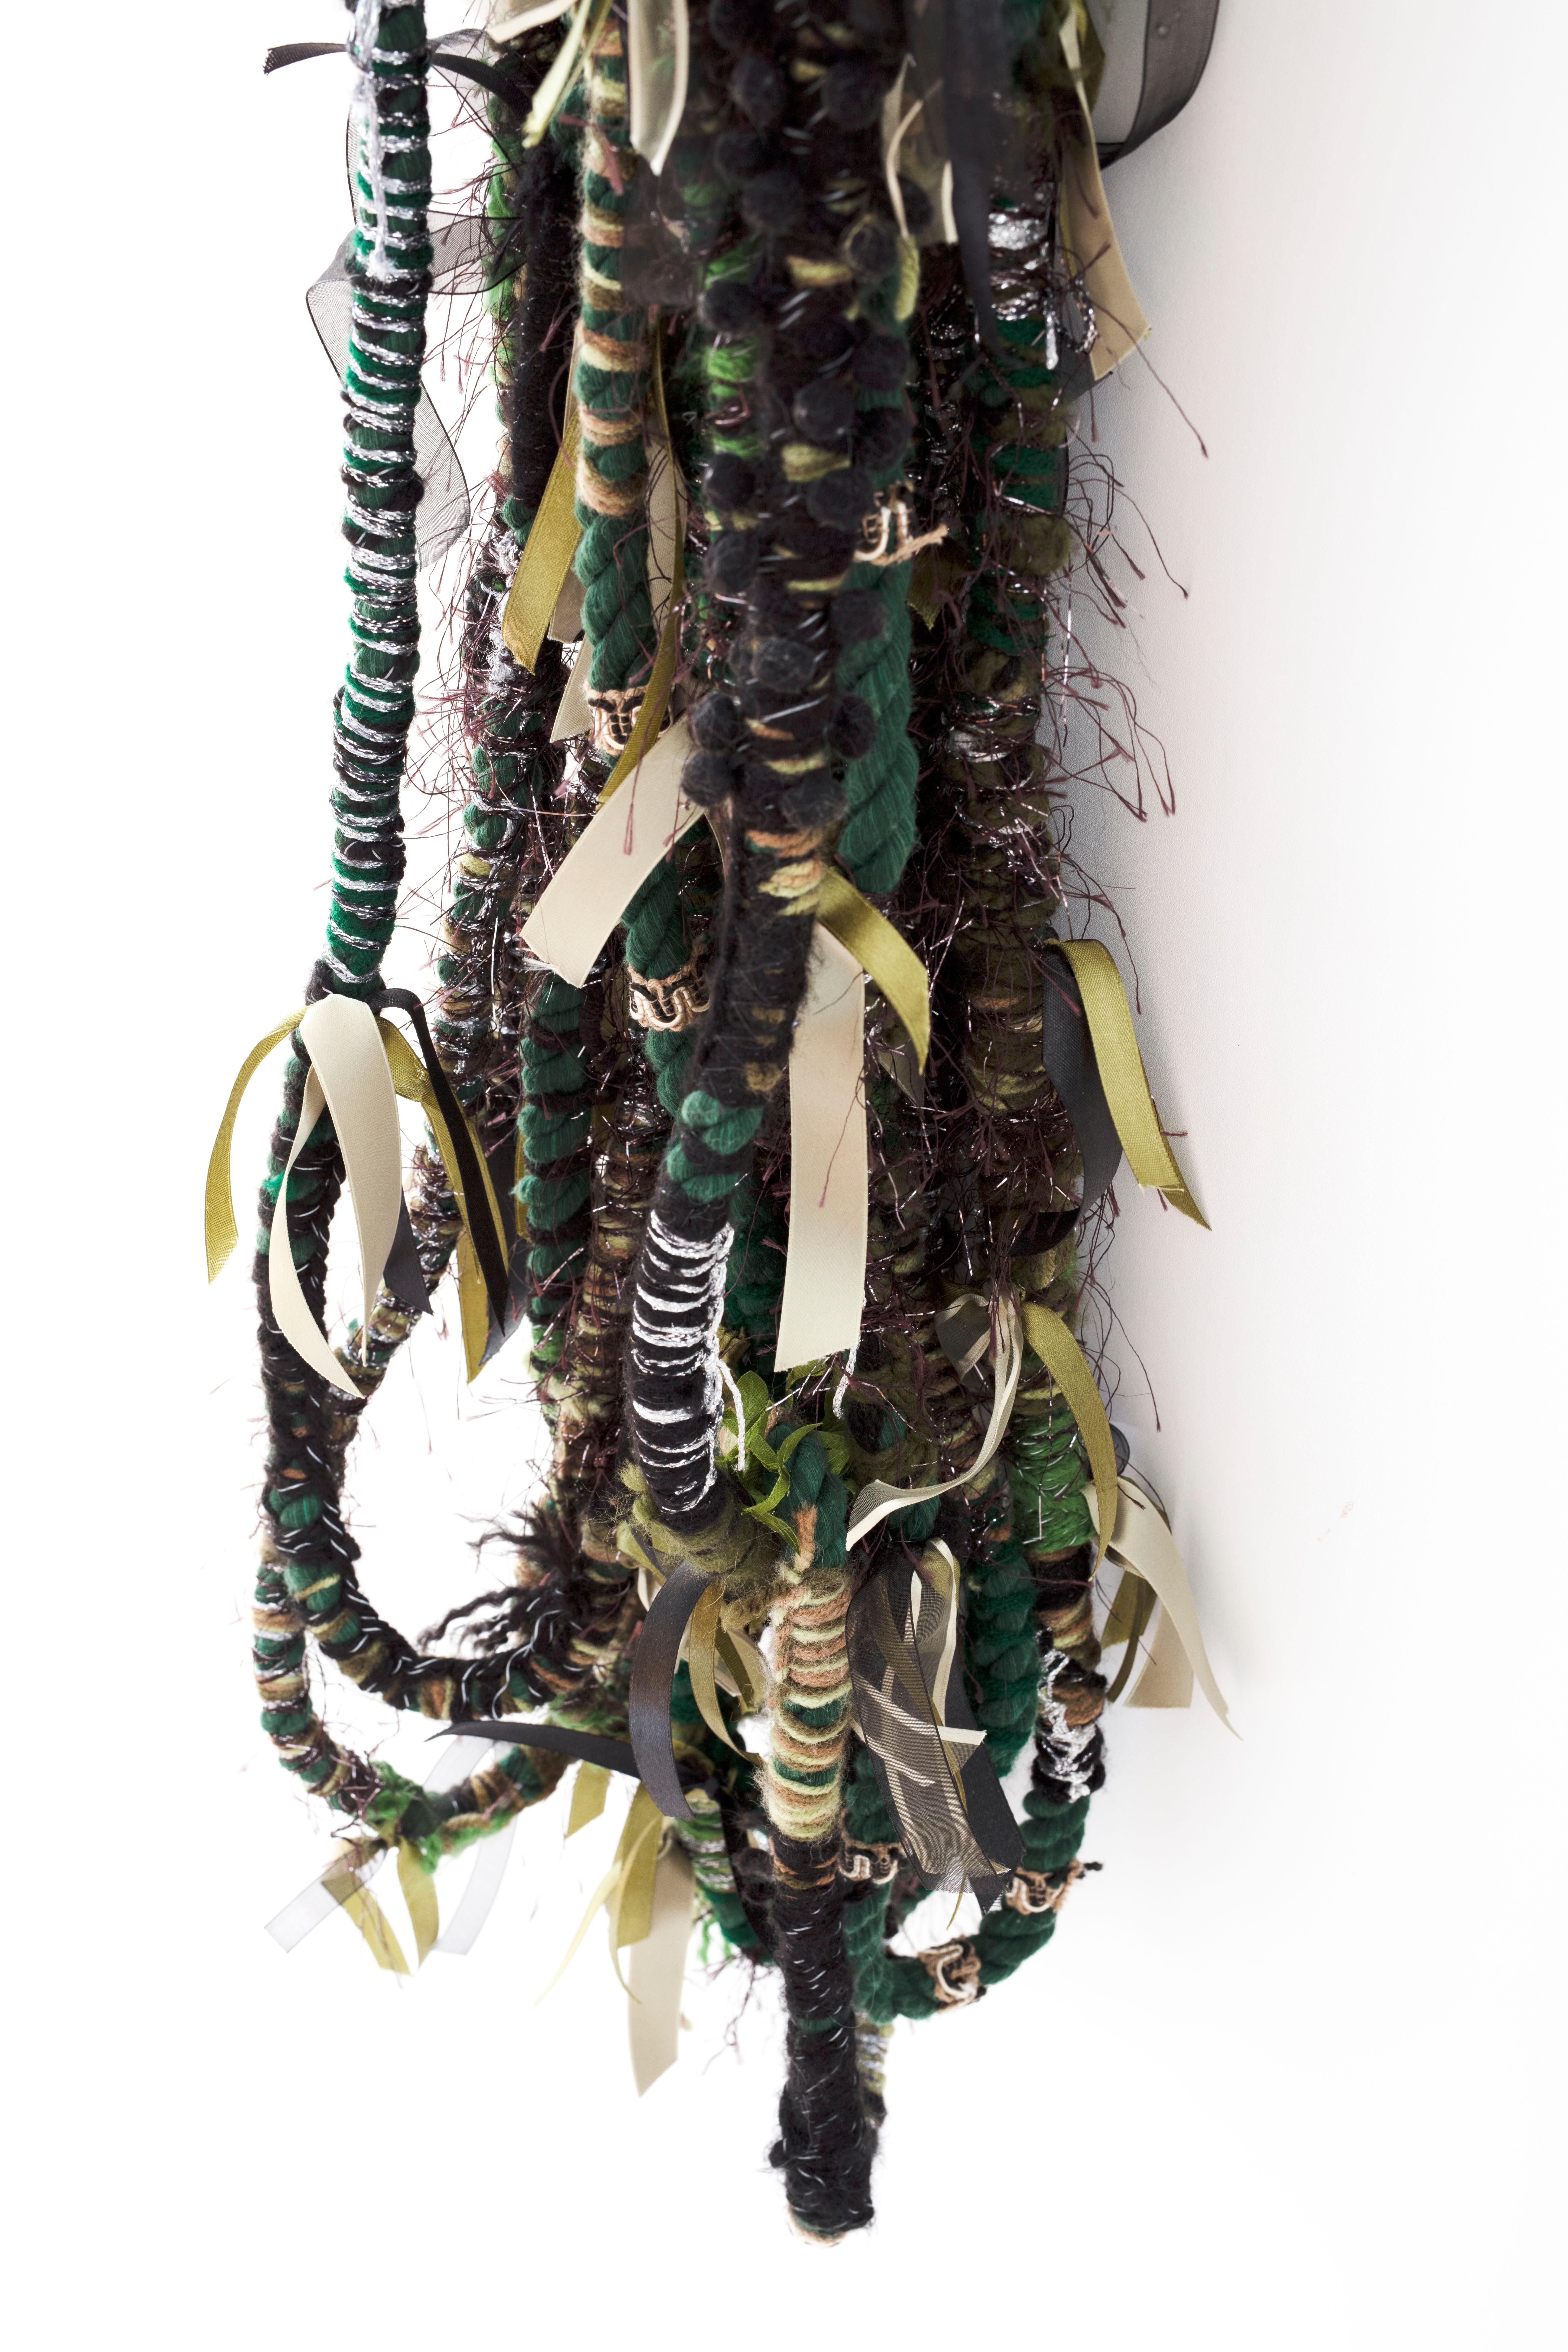 Extensions of rope, impeccably wrapped, woven, tied and embellished with recycled beads, zip ties, ribbon, lace, tape and beads lure you into a hue-imbued, installation symbolizing natural hair. These whimsical fiber sculpture gingerly invites the